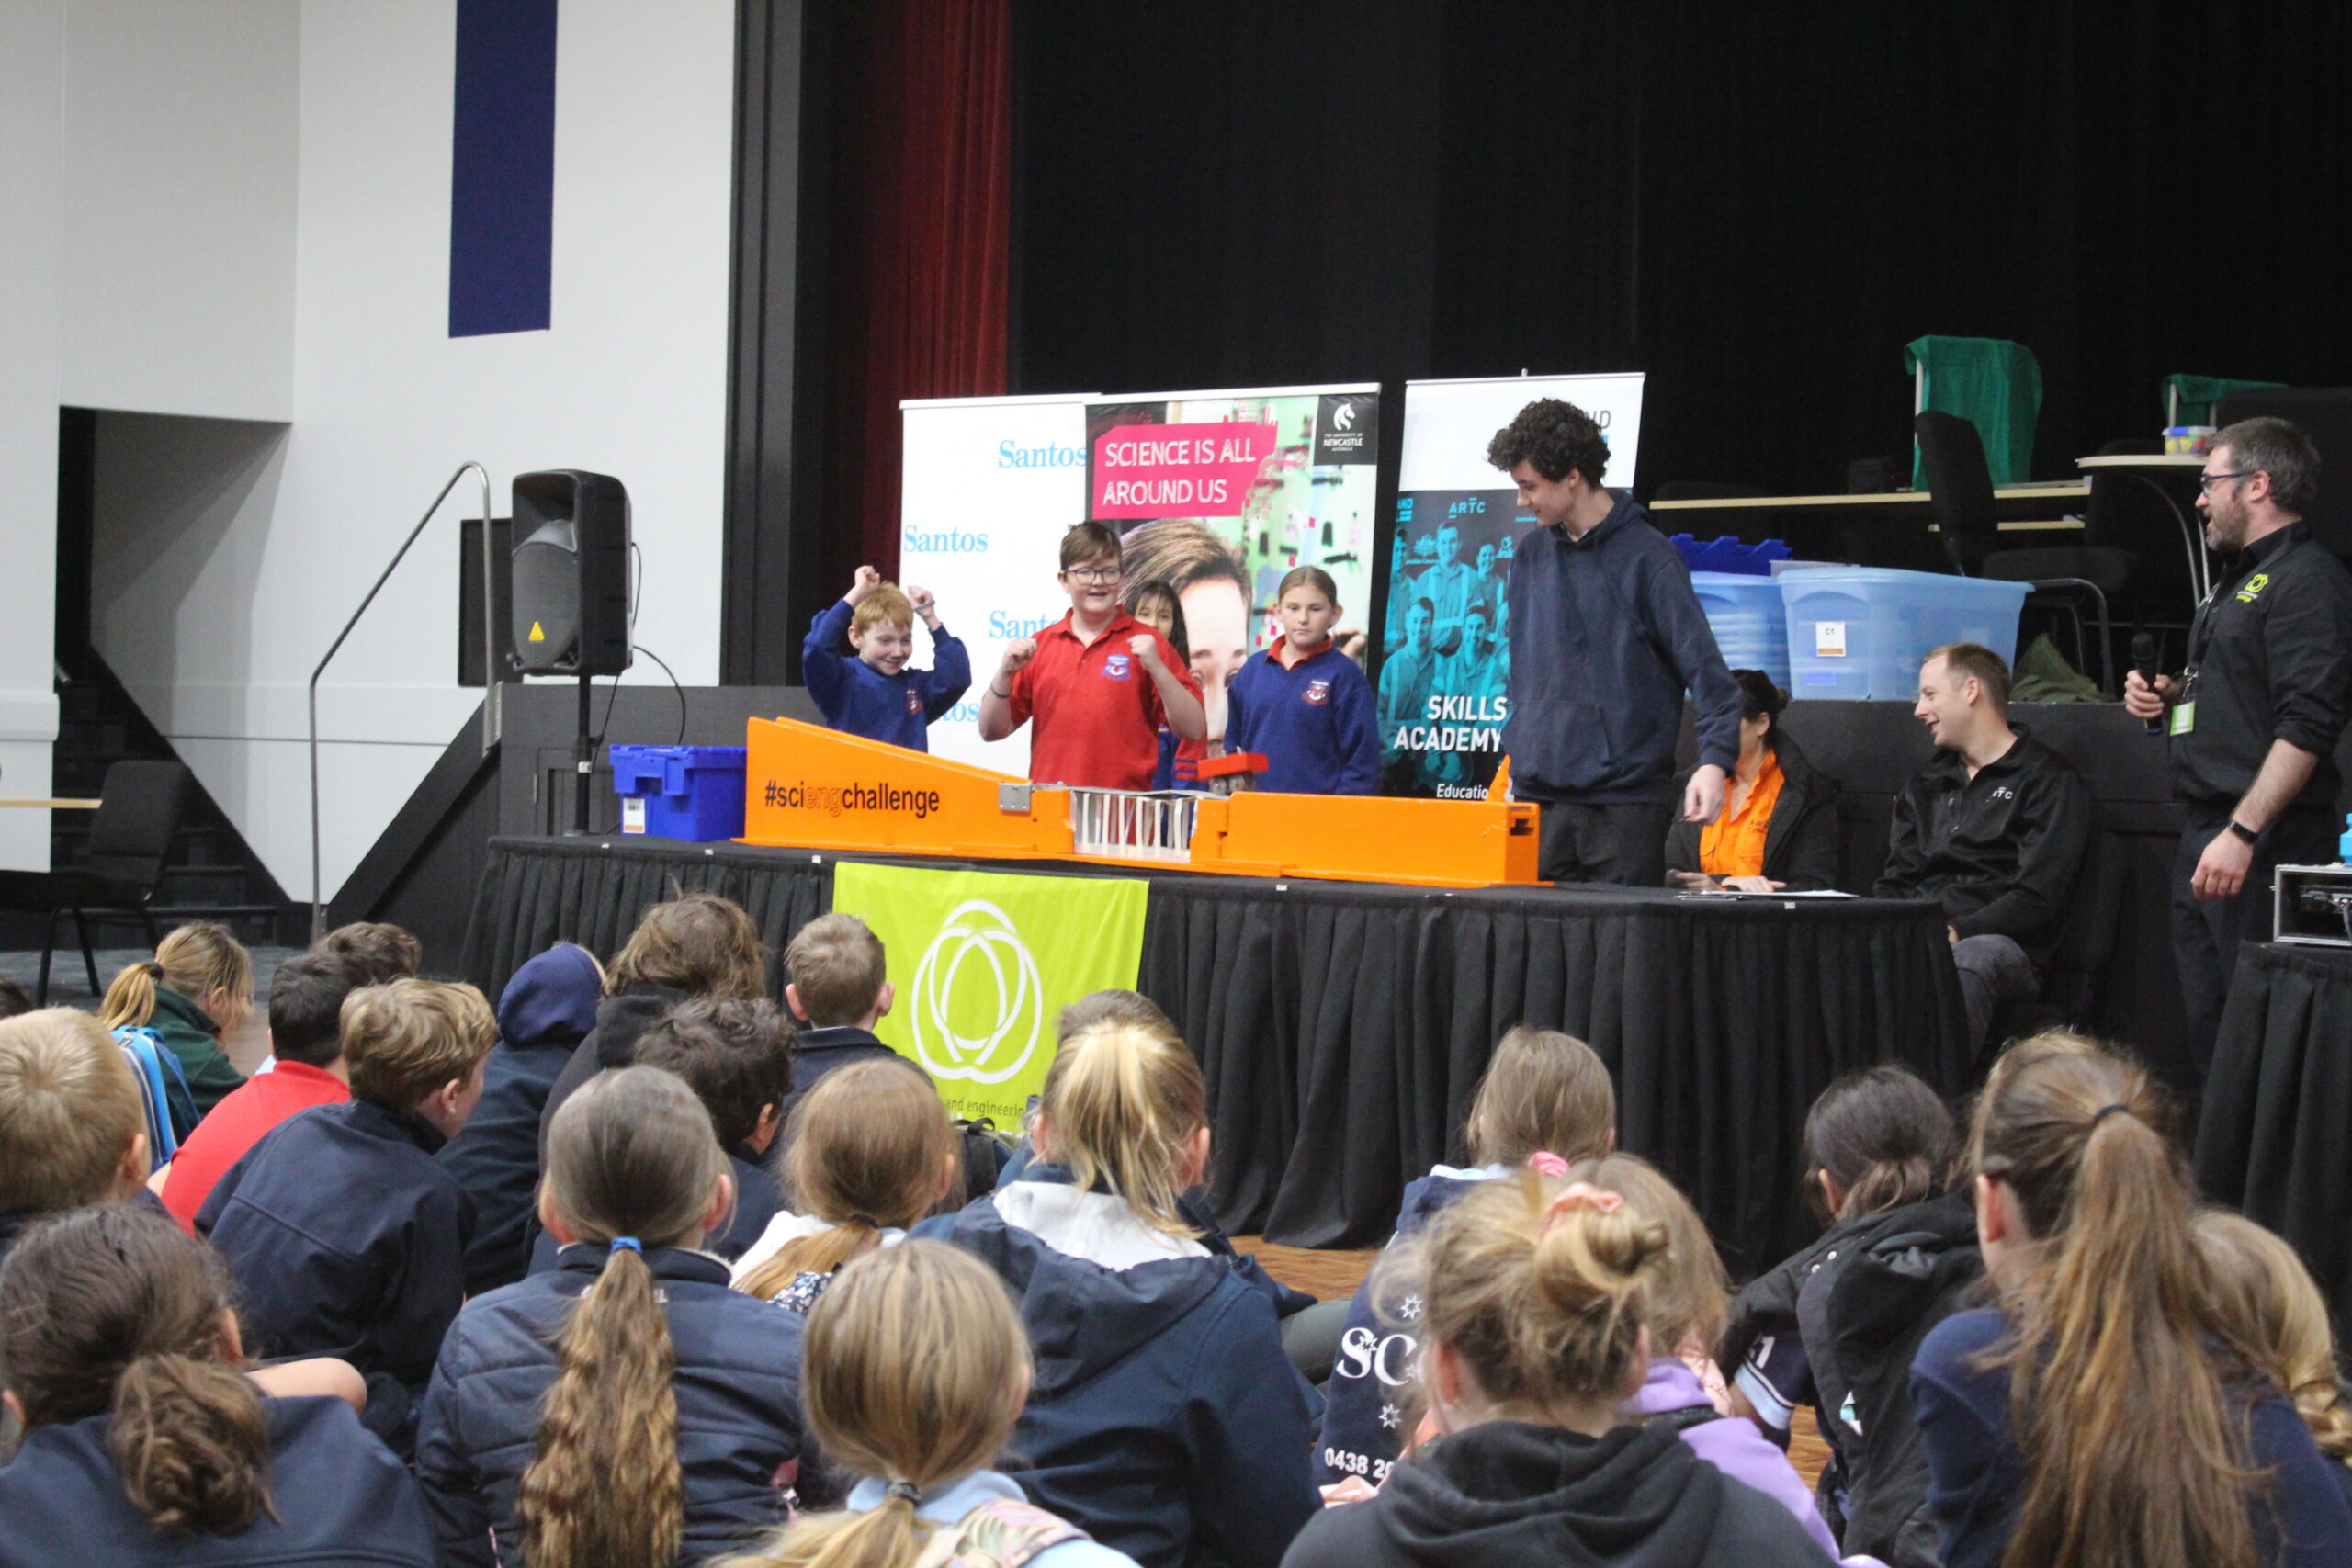 Narrabri West Public School students Jonothan Anderson, Lucas Griffiths, Riley Firth, (obscured) and Hayley Gordon in front of the audience, celebrating their bridge withstanding the weighted vehicle test.